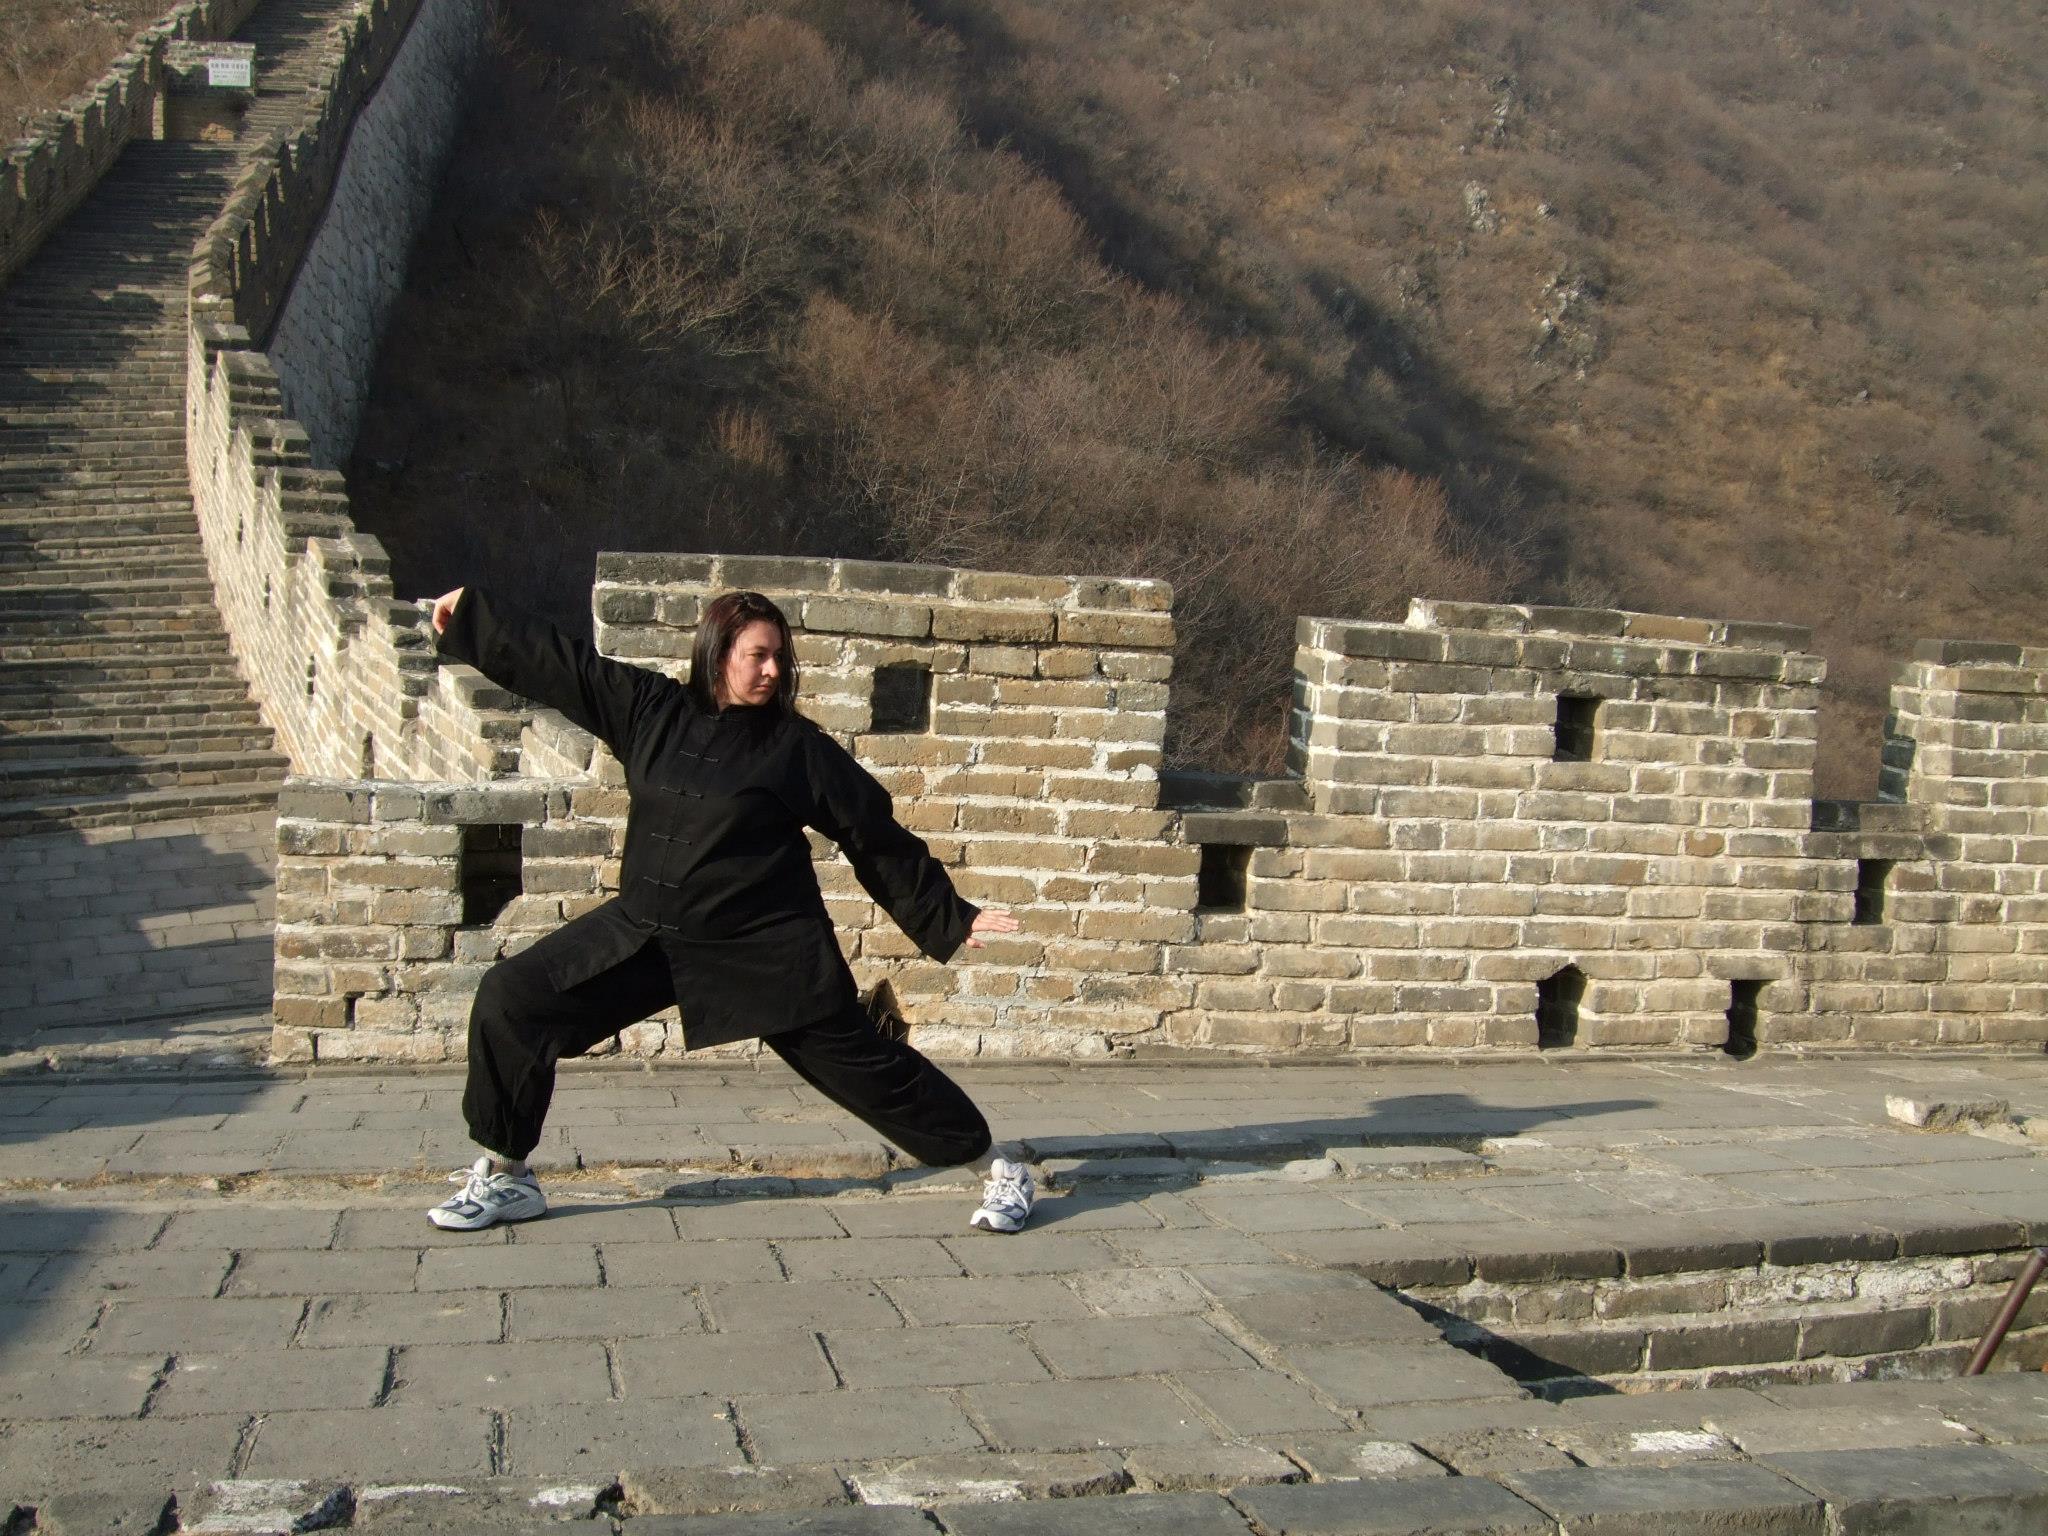 Tai Chi on the Great Wall of China